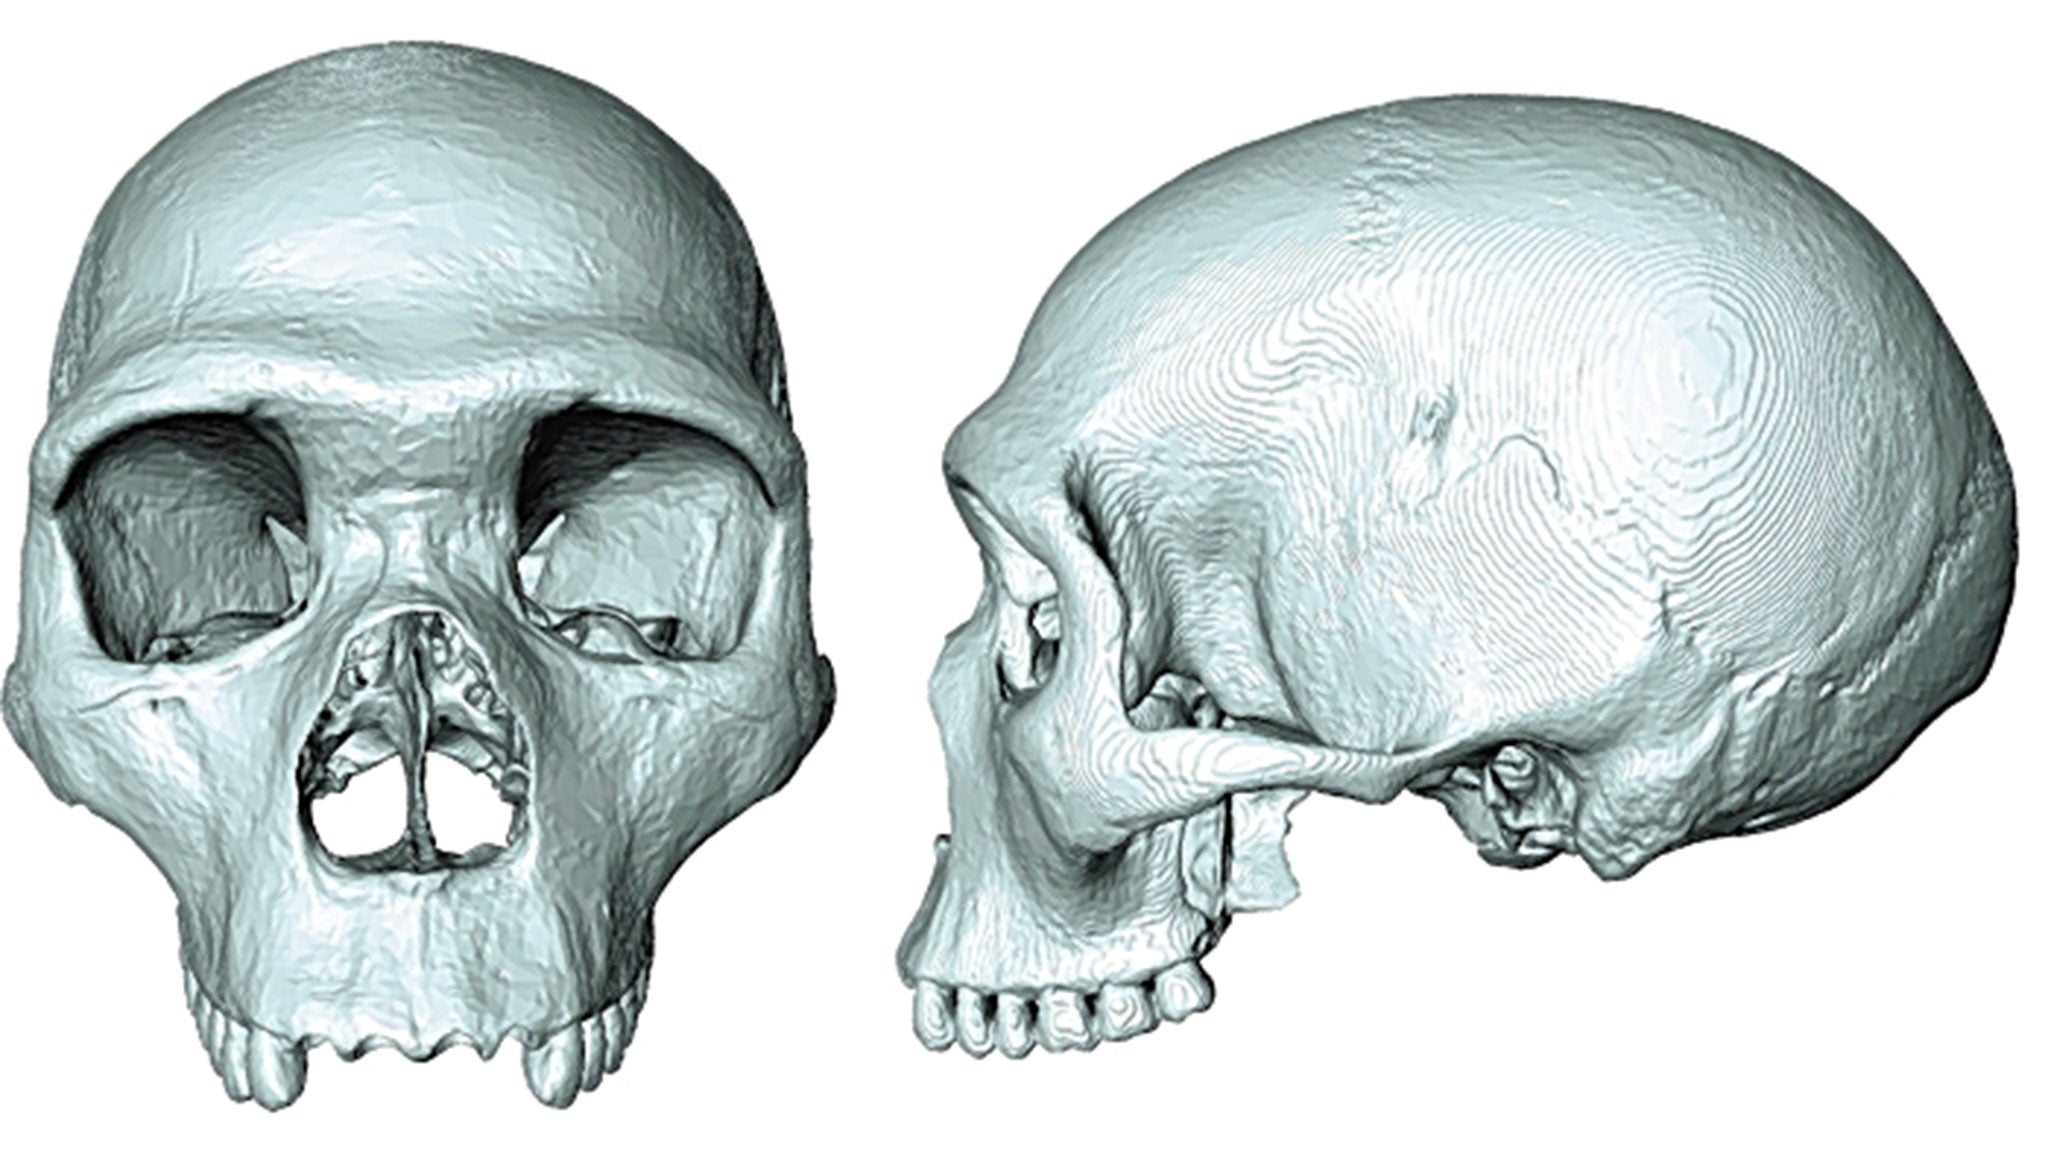 The computer modelling image showing what our 'pre-split' ancestors looked like